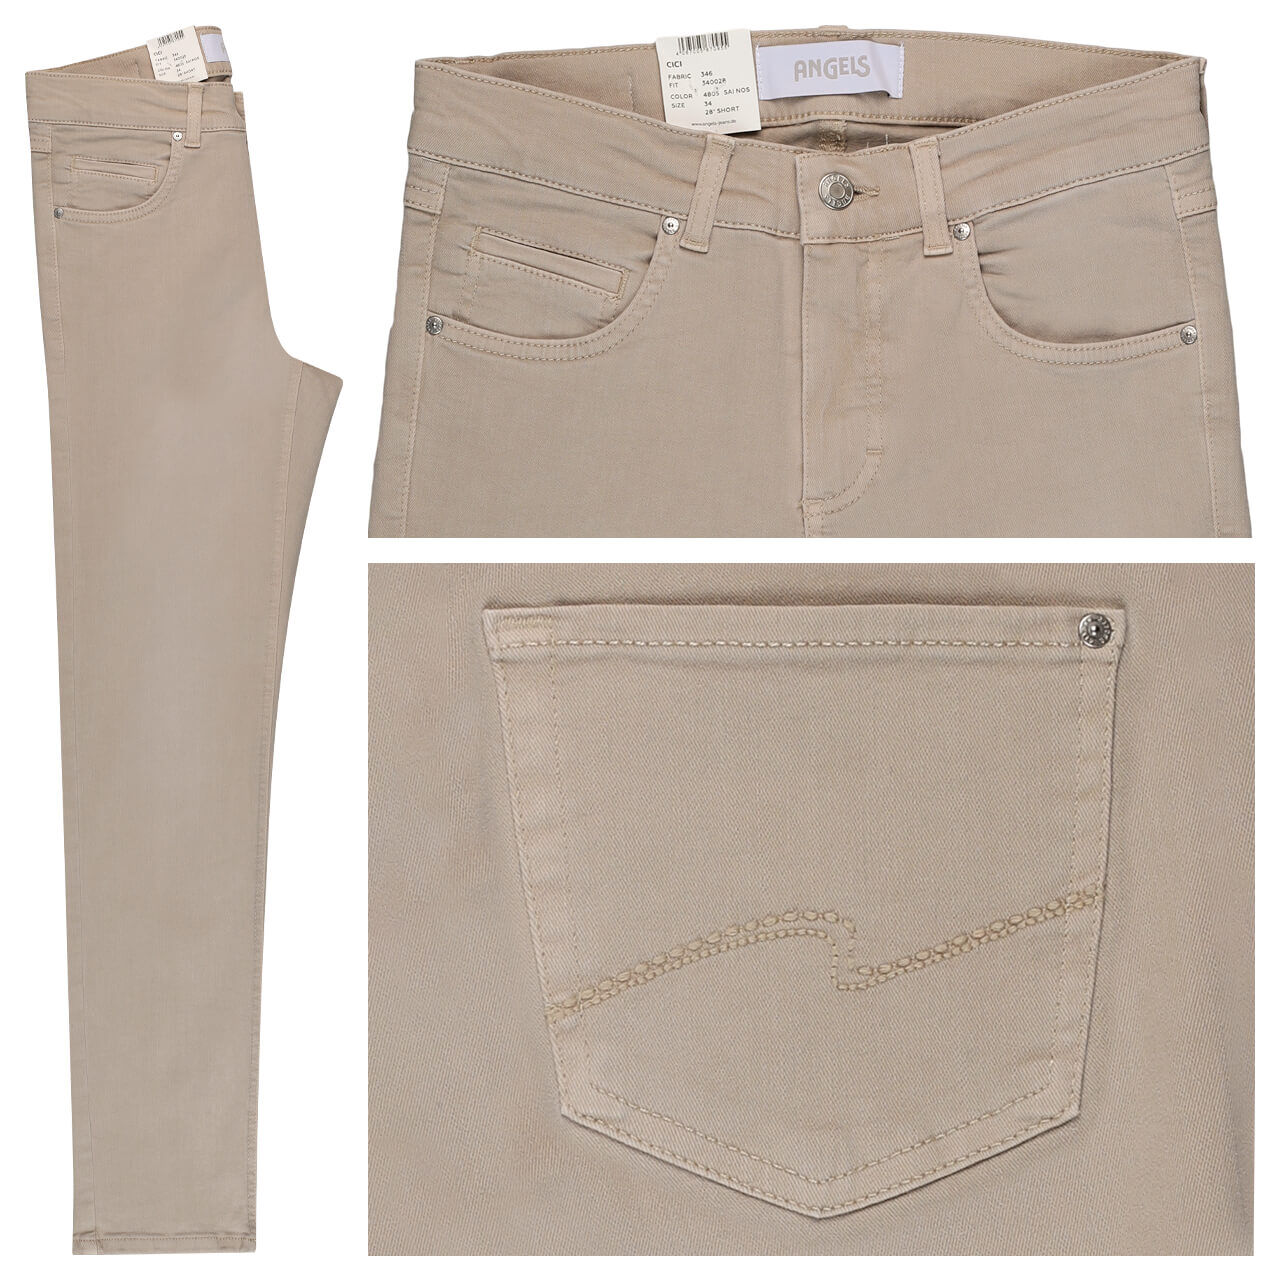 Angels Cici Jeans beige used